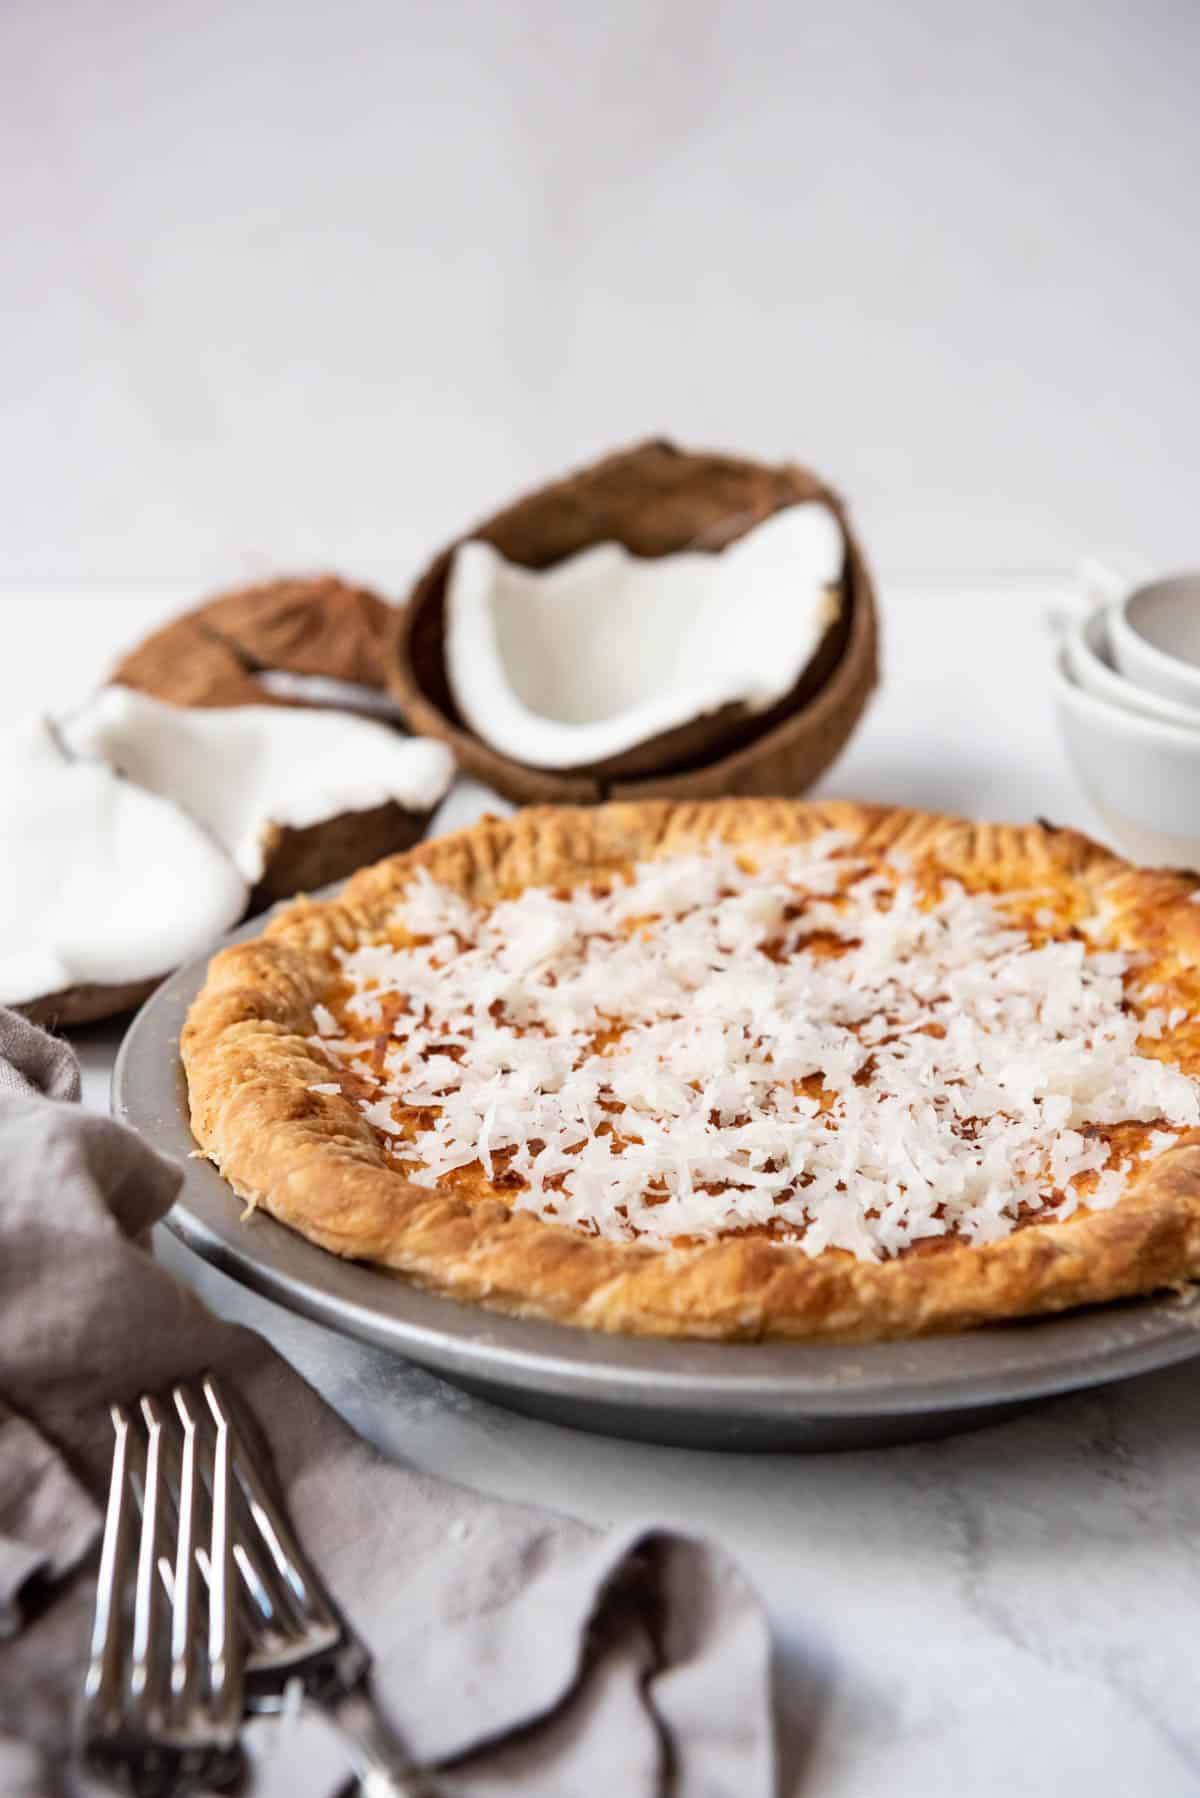 A side view of an old-fashioned coconut custard pie.